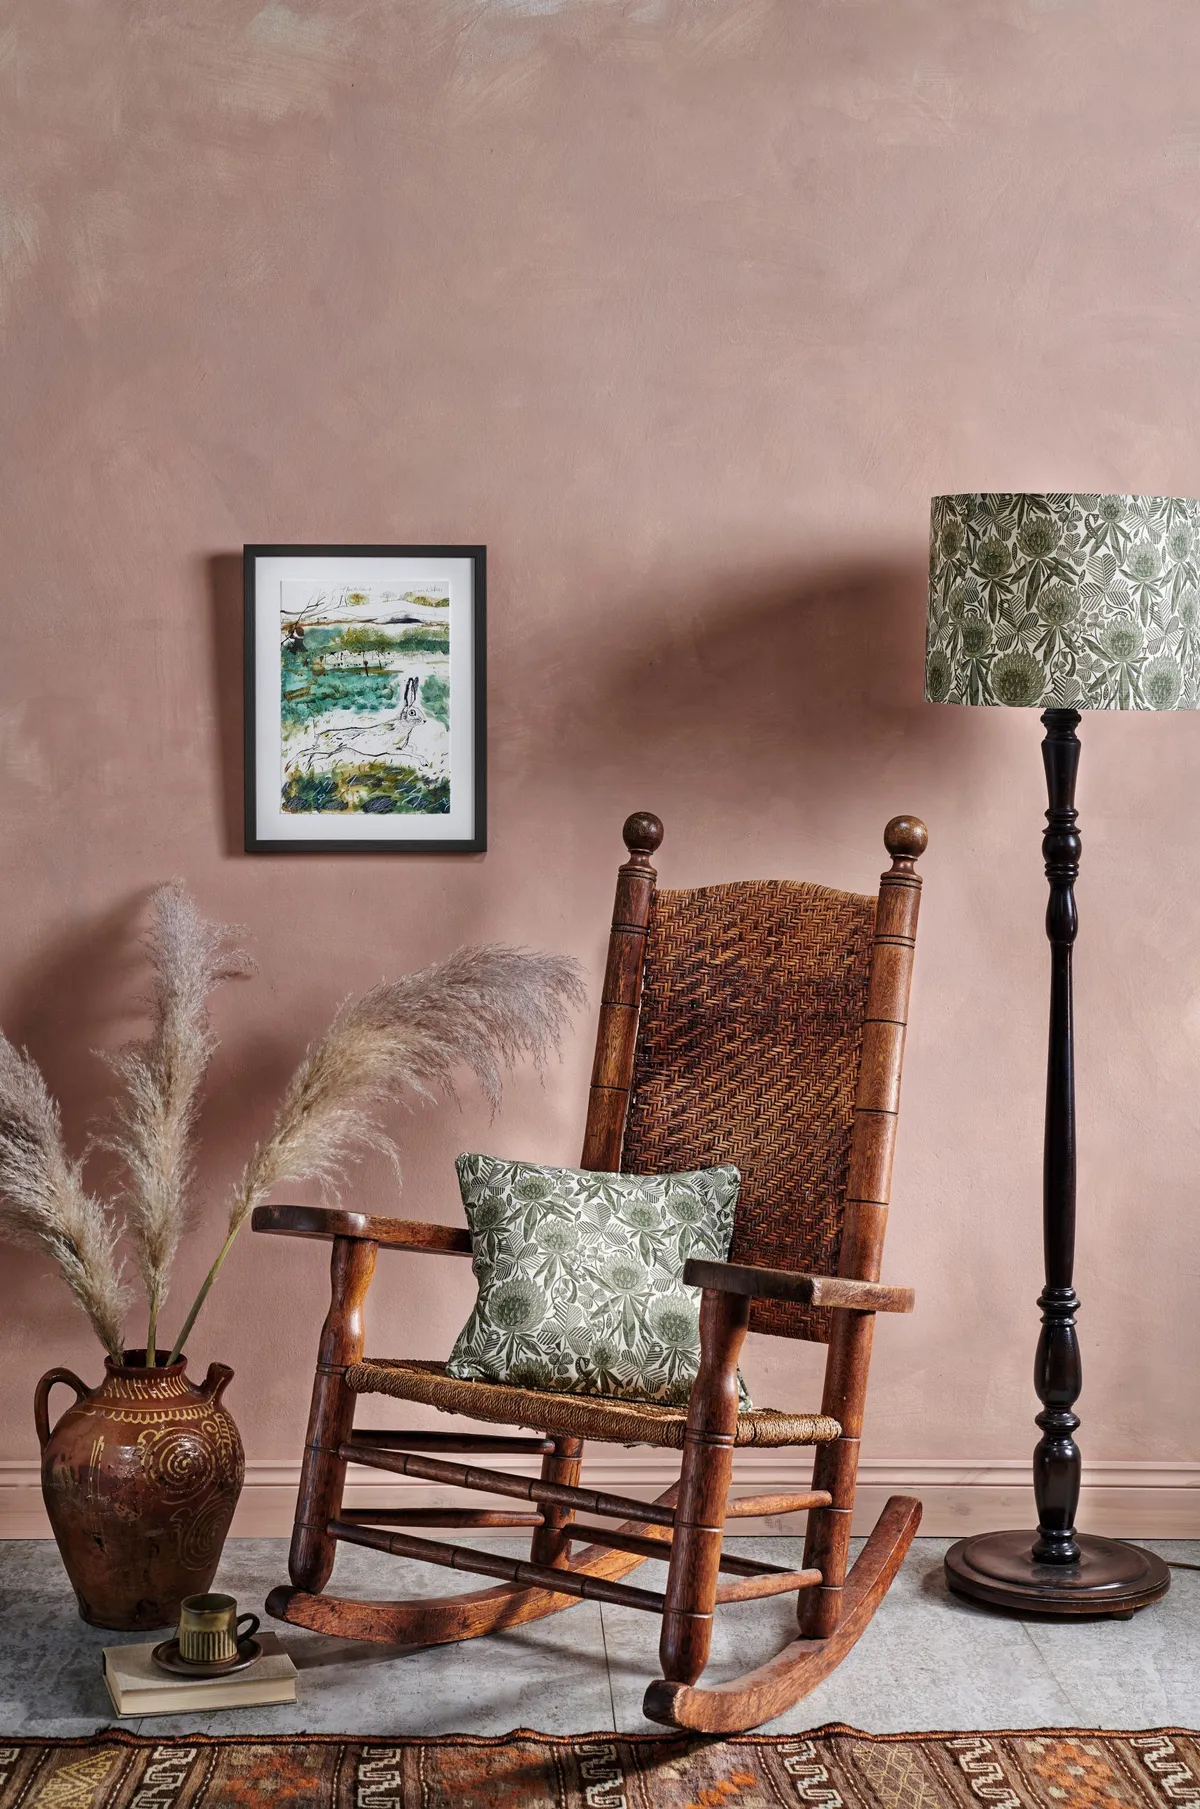 Wood and terracotta combined bring out the richness in each material. Pick a light-filled spot for a well-loved chair and imagine the hands that carved its frame and wove its seat.